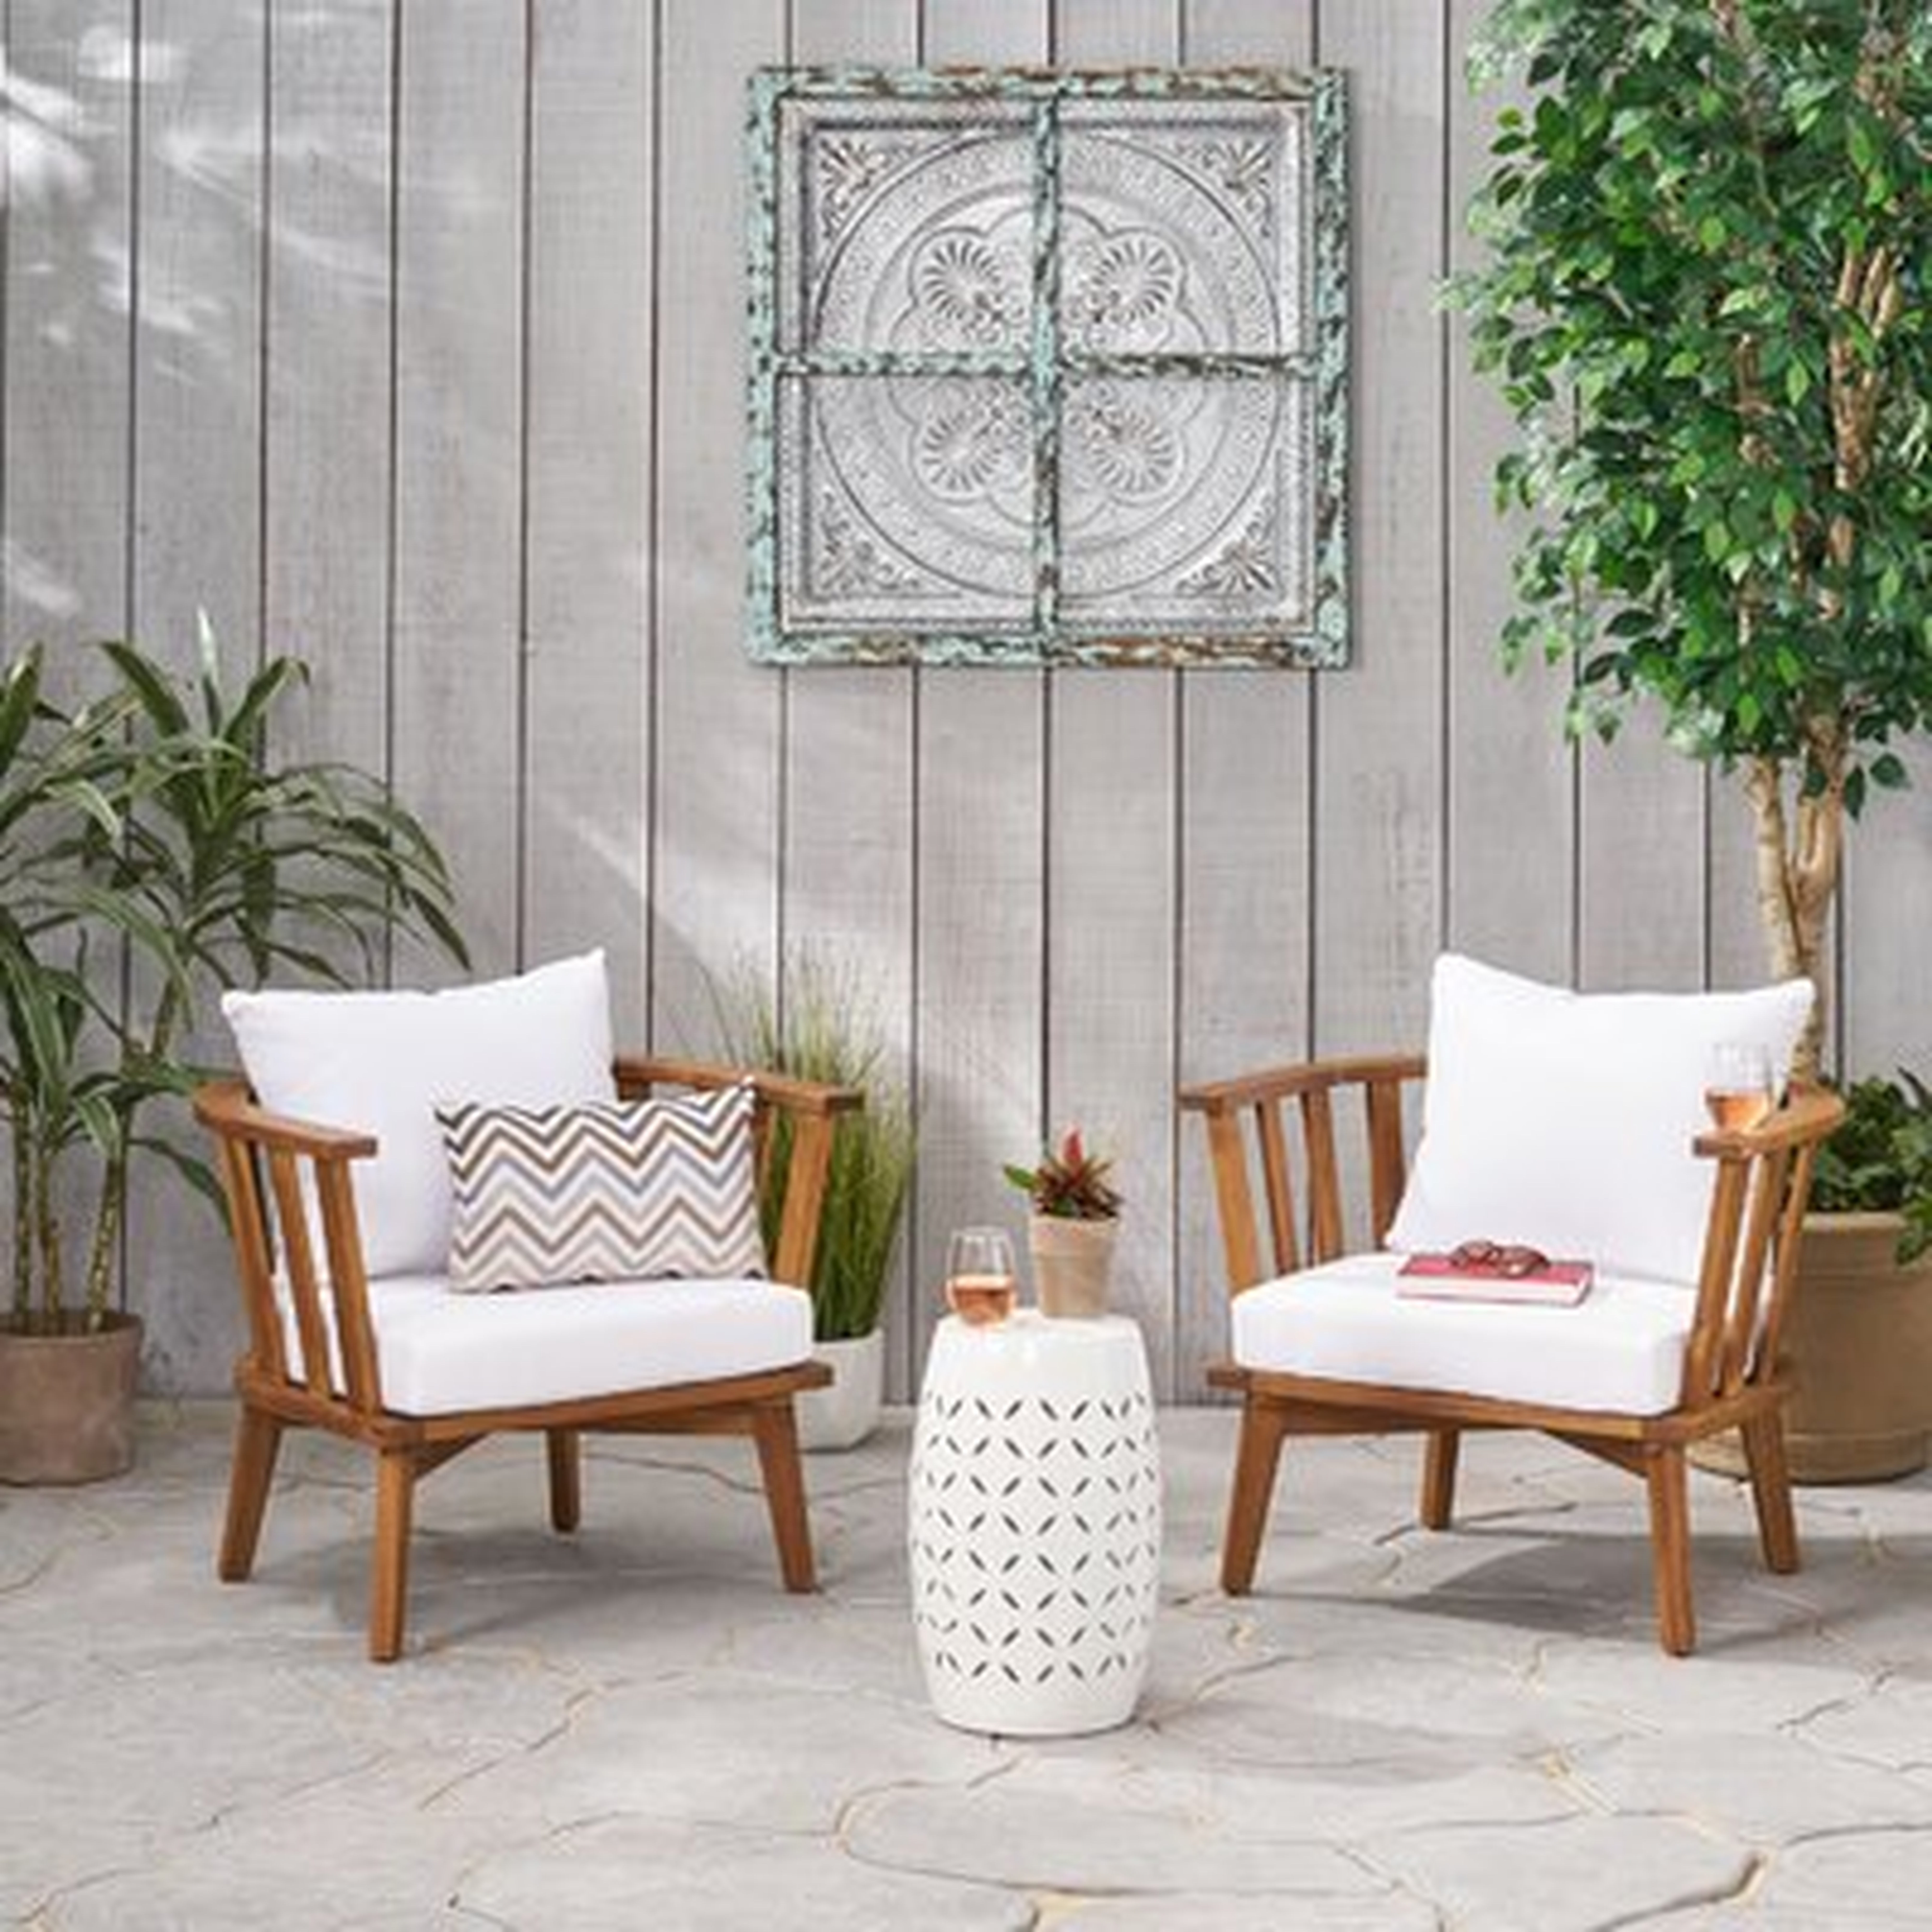 Reichel Outdoor 3 Piece Seating Group with Cushions - Wayfair